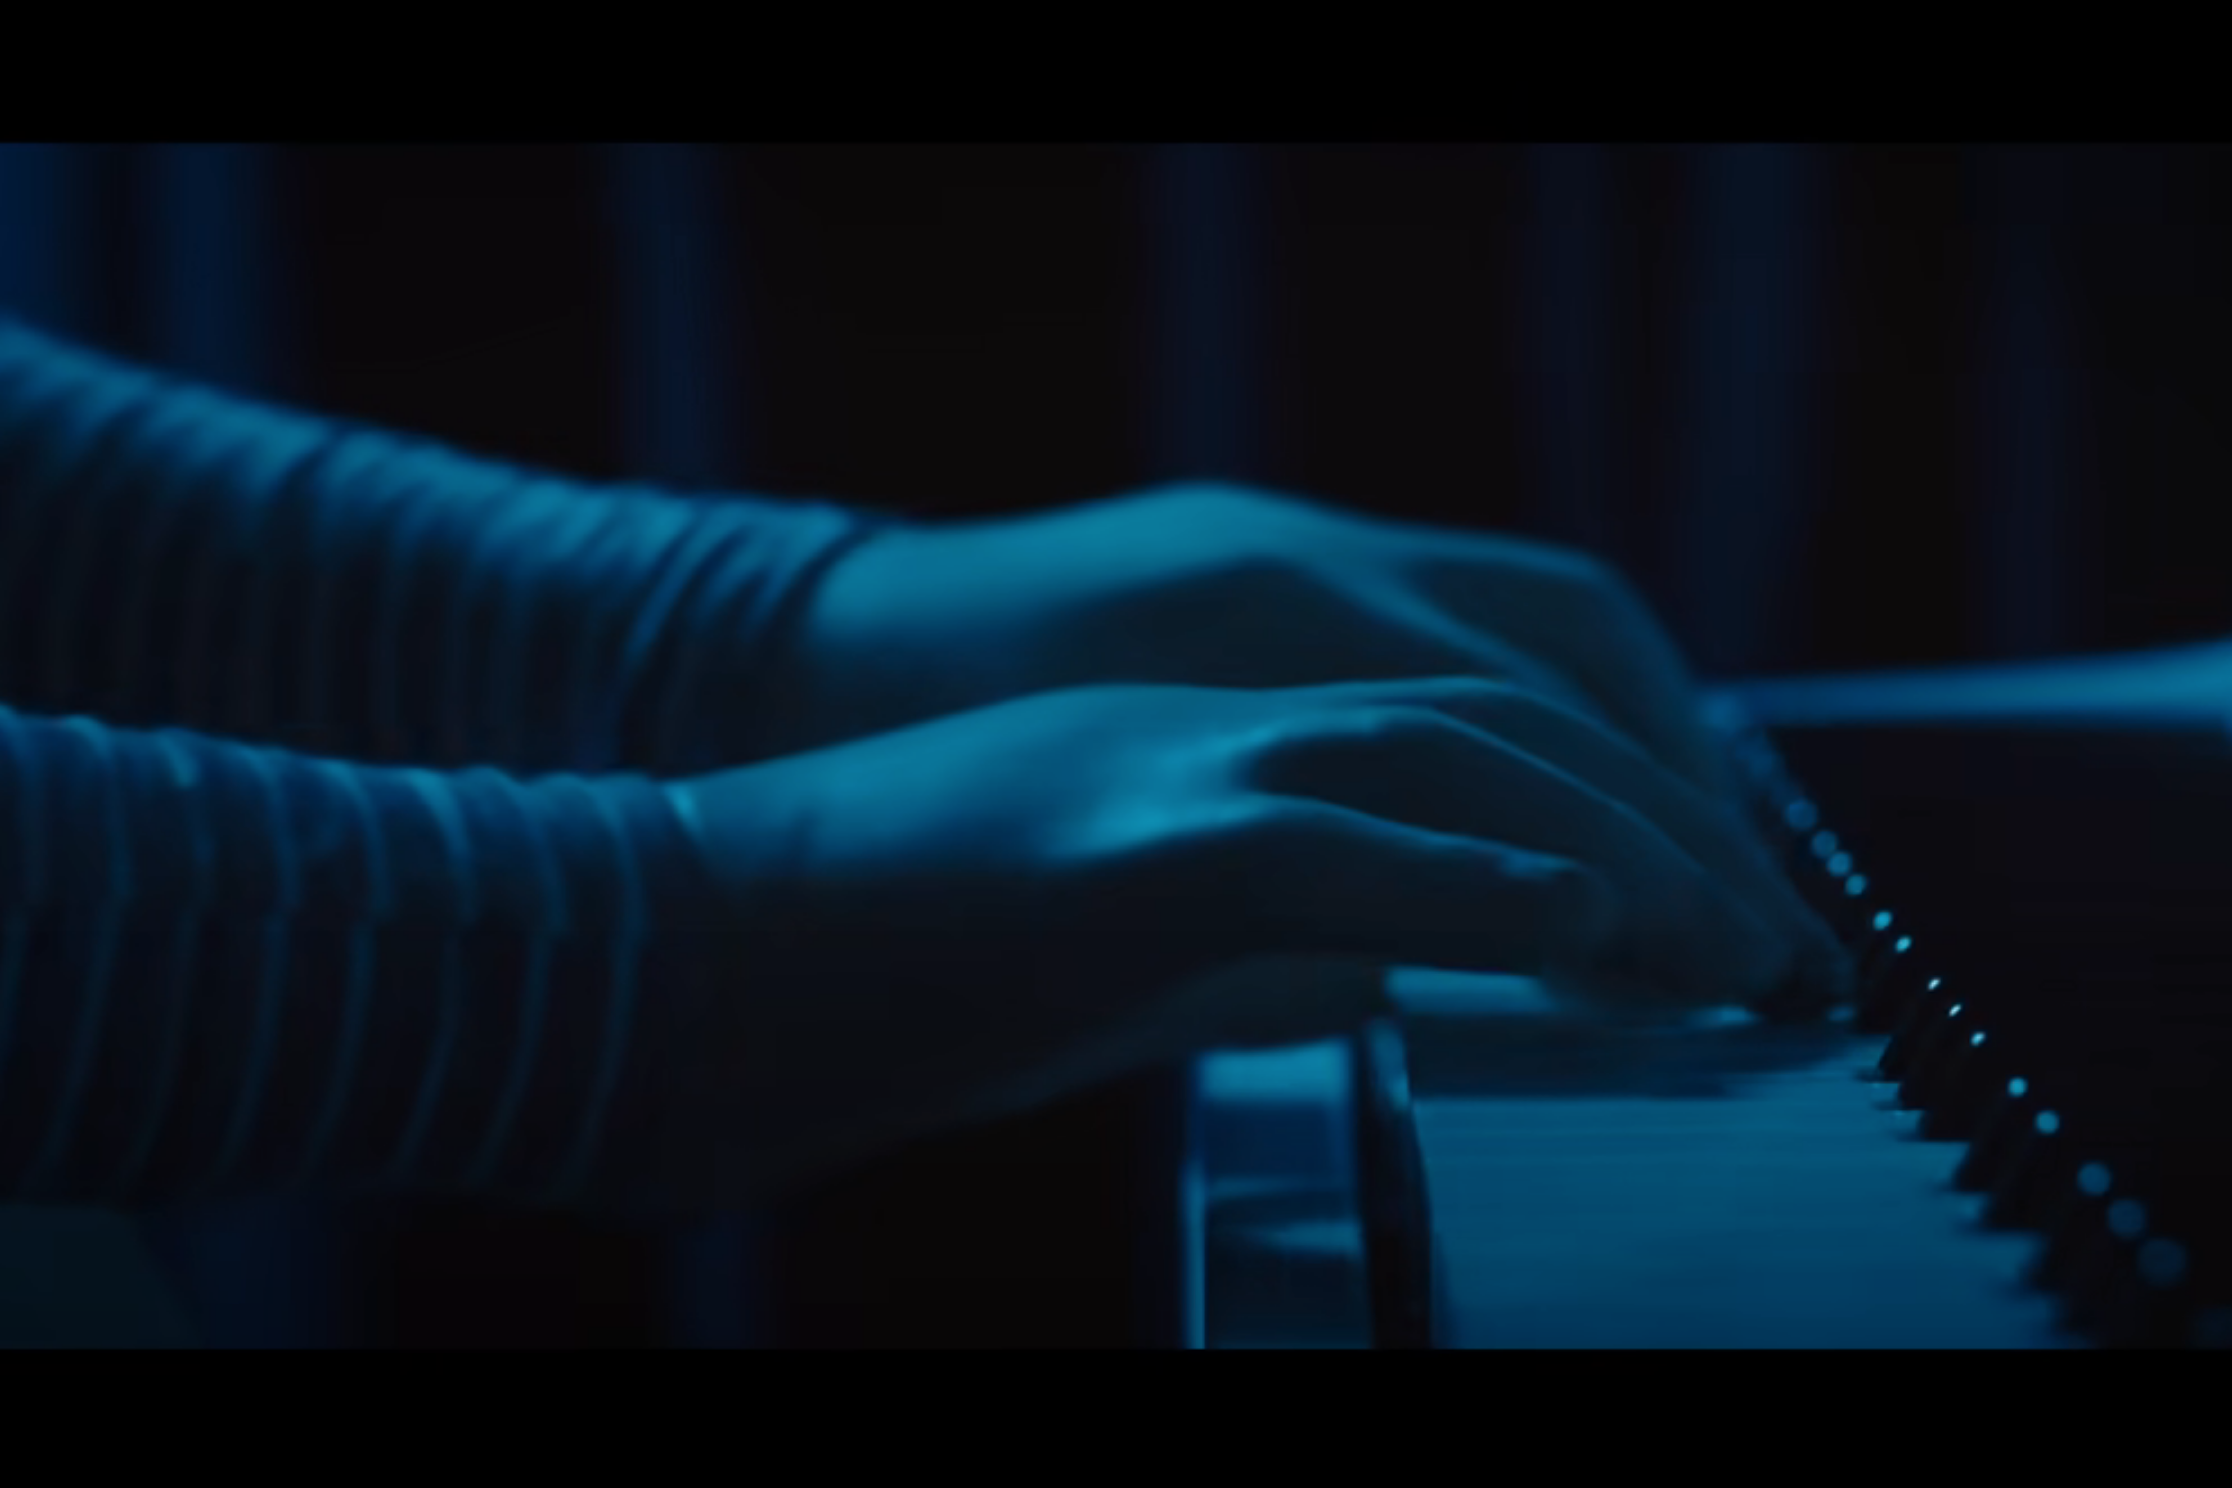 M3gan's hands on the piano.